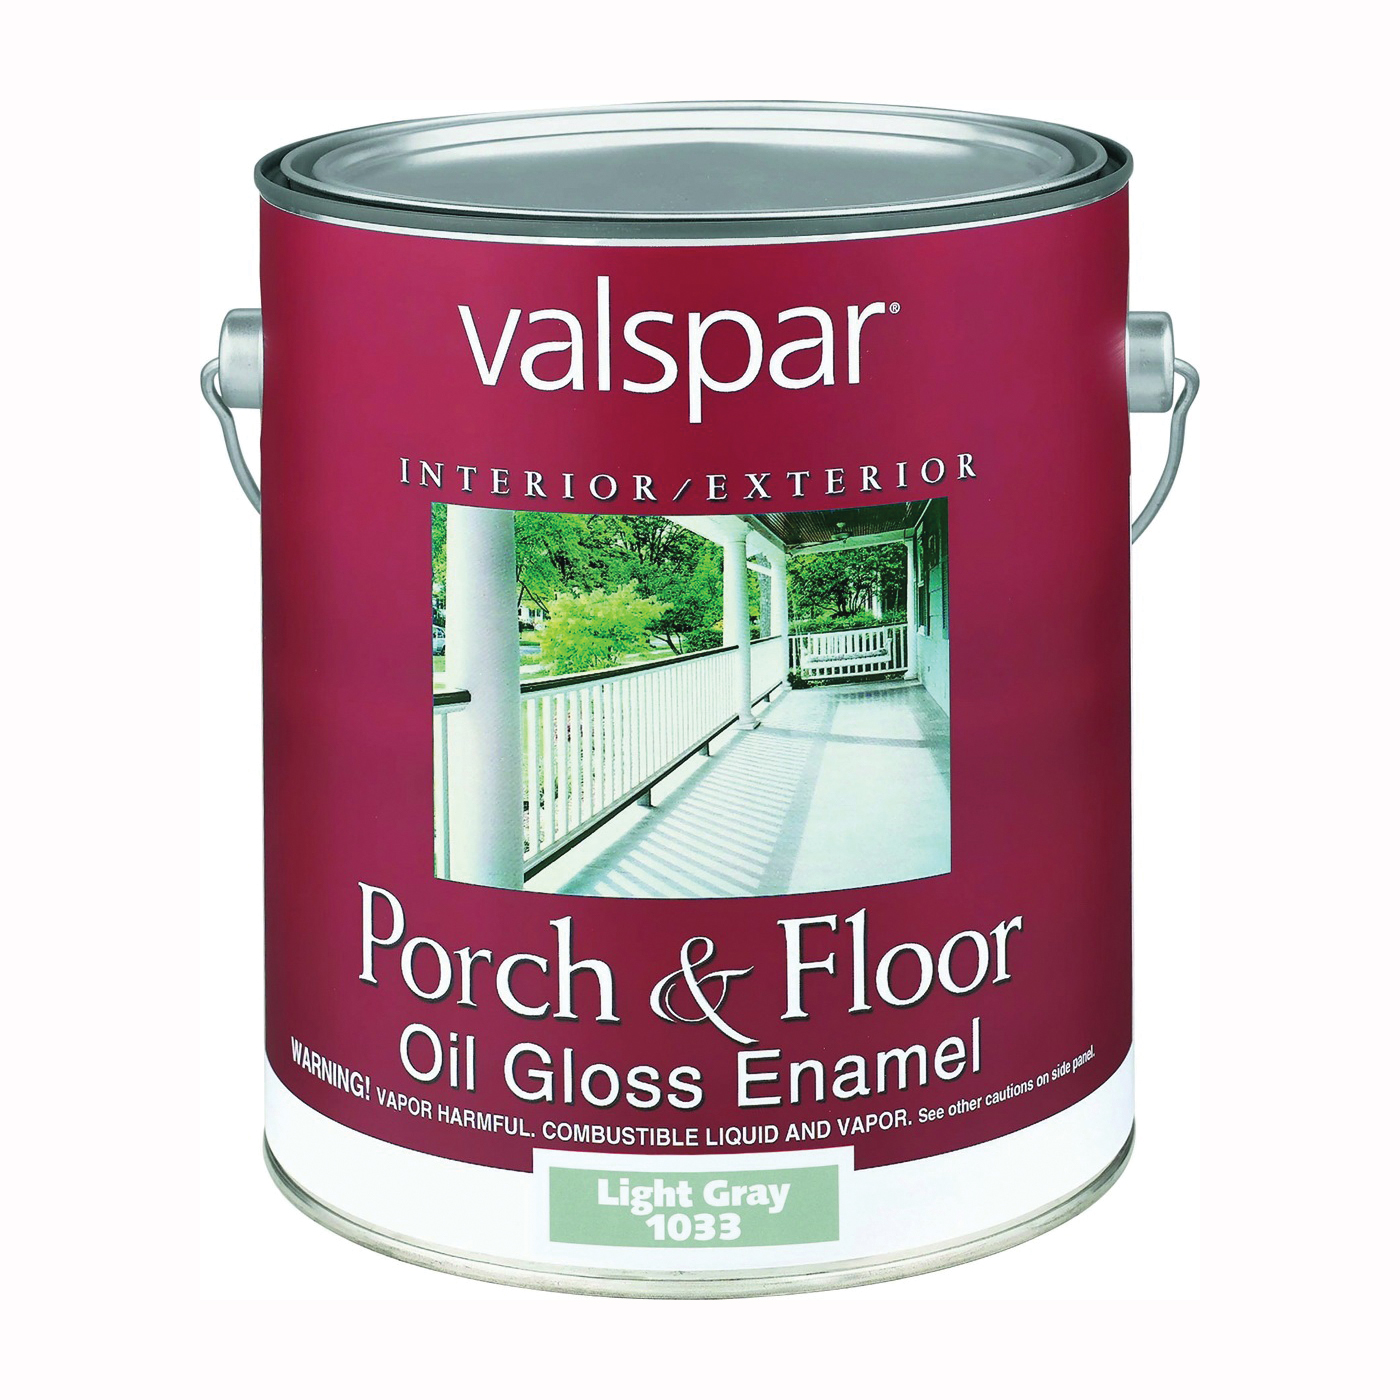 Valspar 1006-8A Cameo Pink Precisely Matched For Paint and Spray Paint